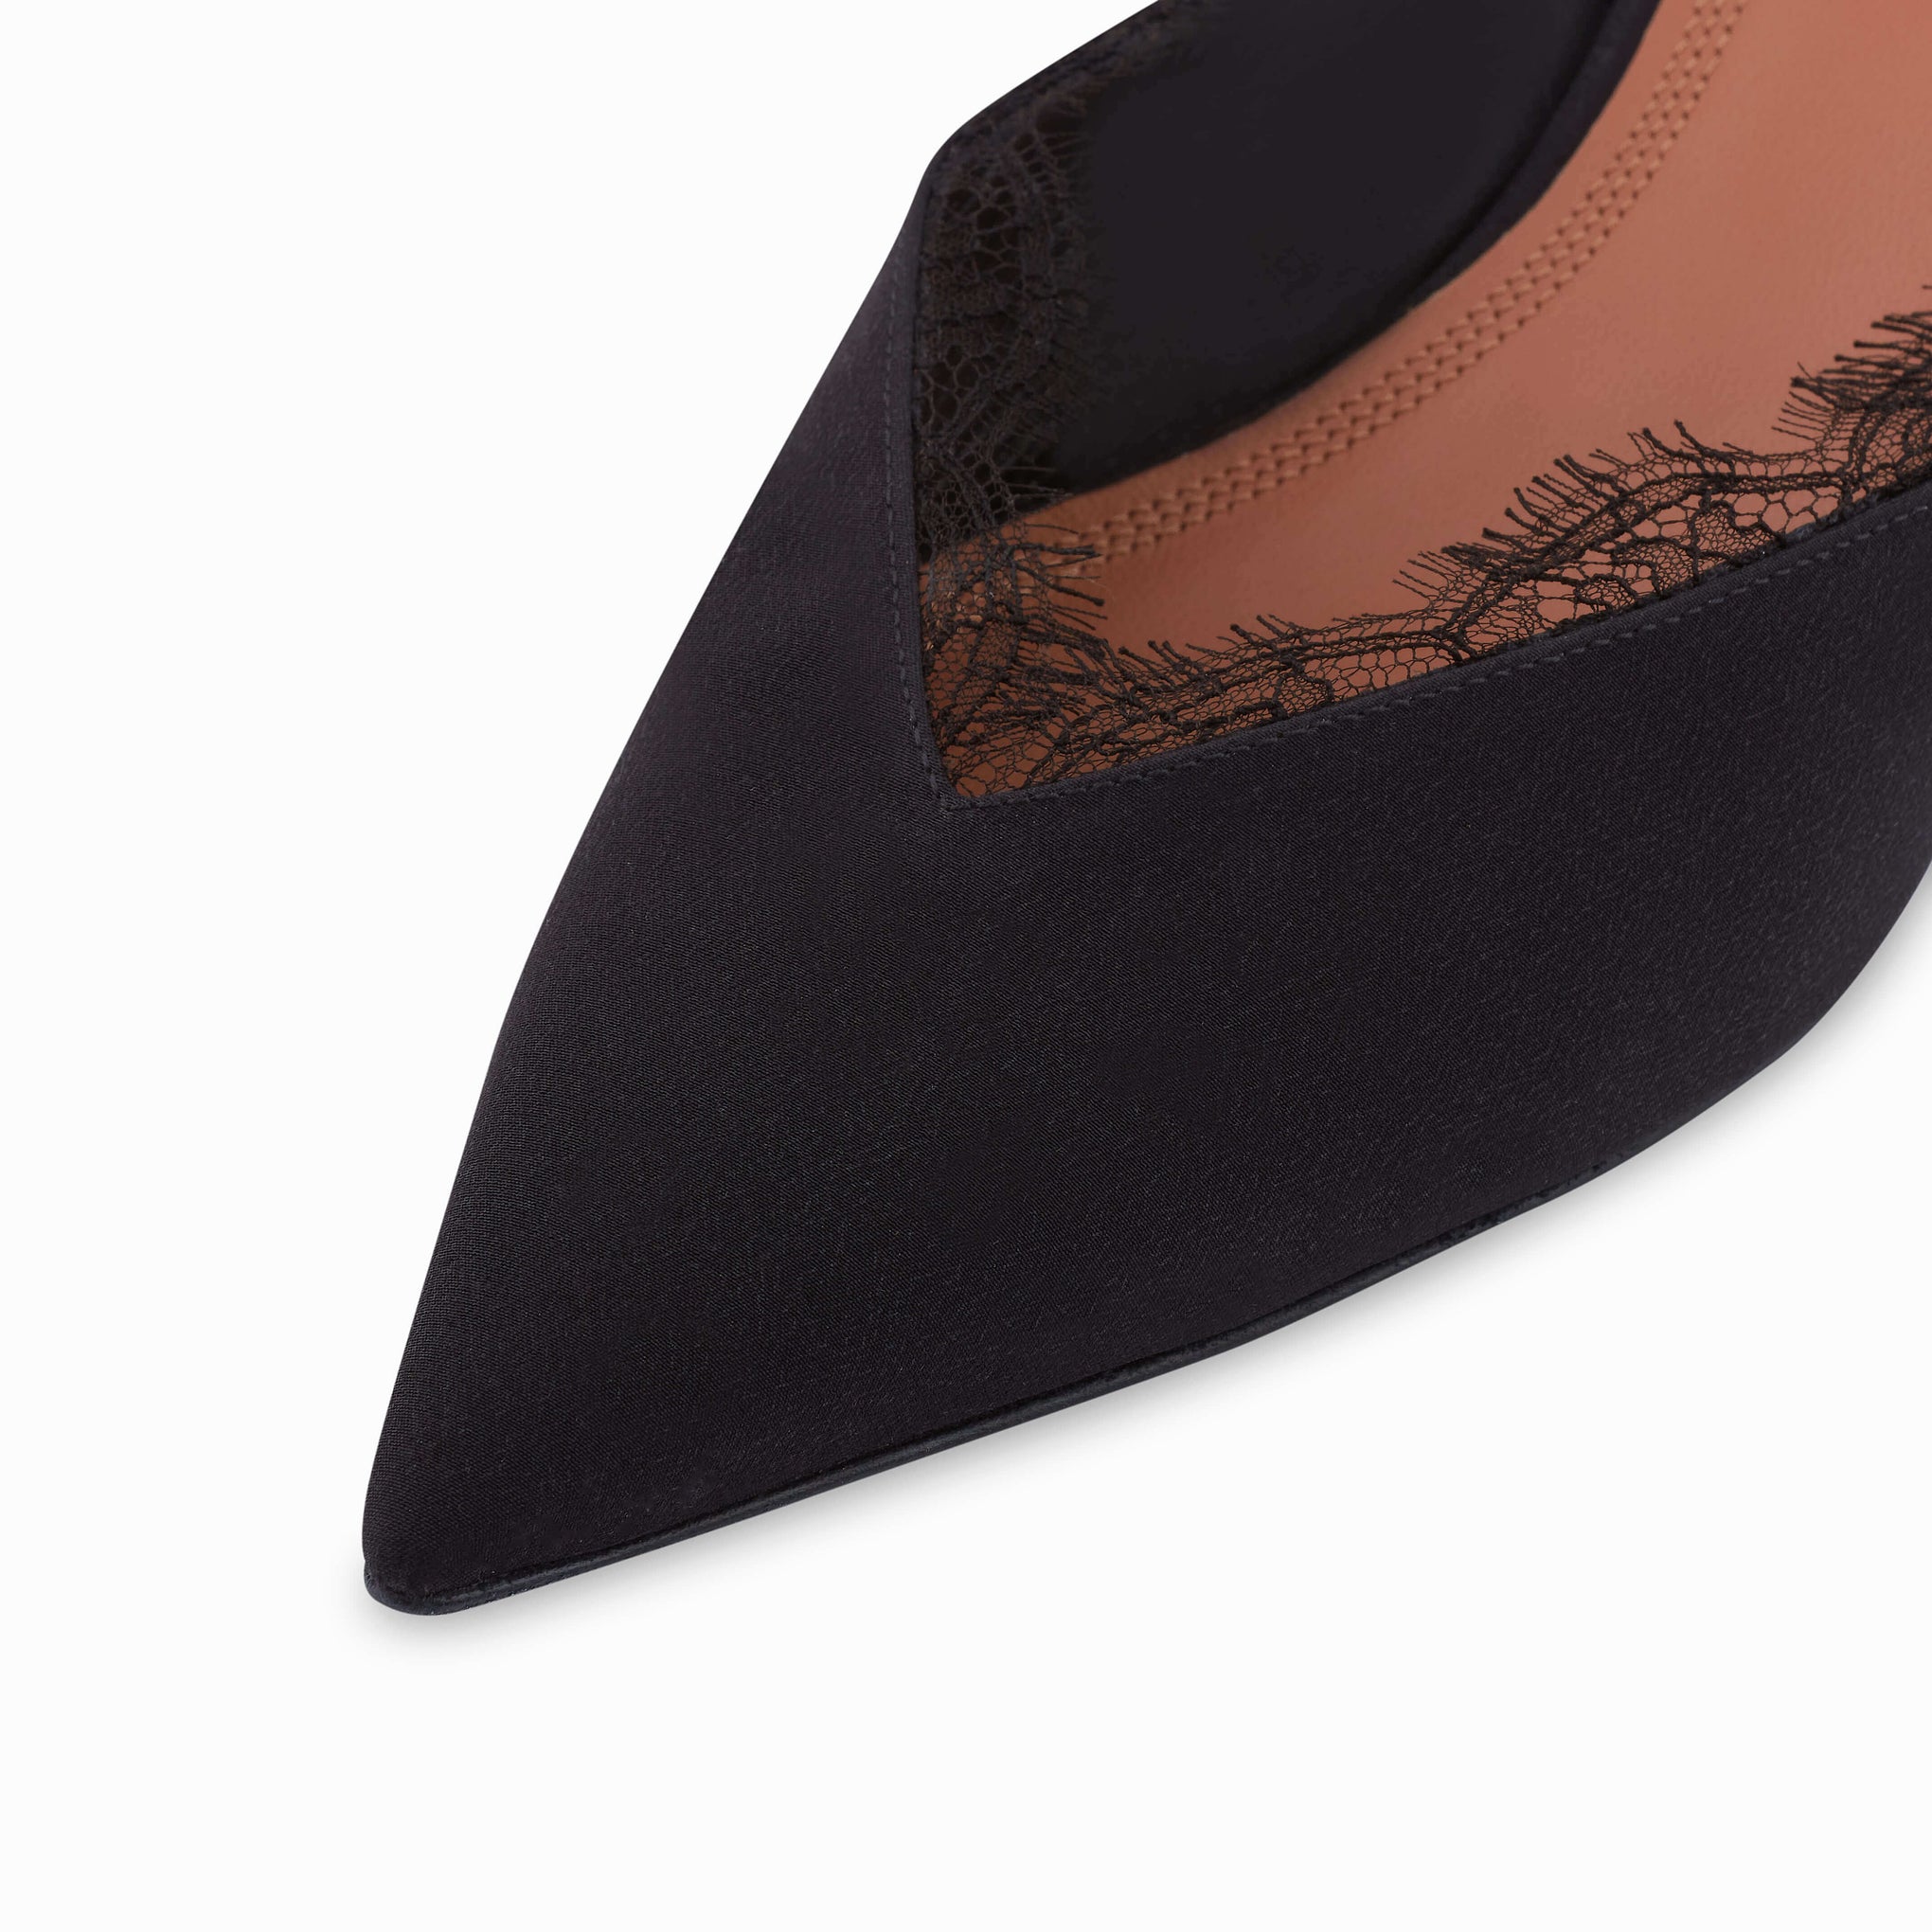 Neous Irena Slingback Mule in Black available at TNT The New Trend Australia.